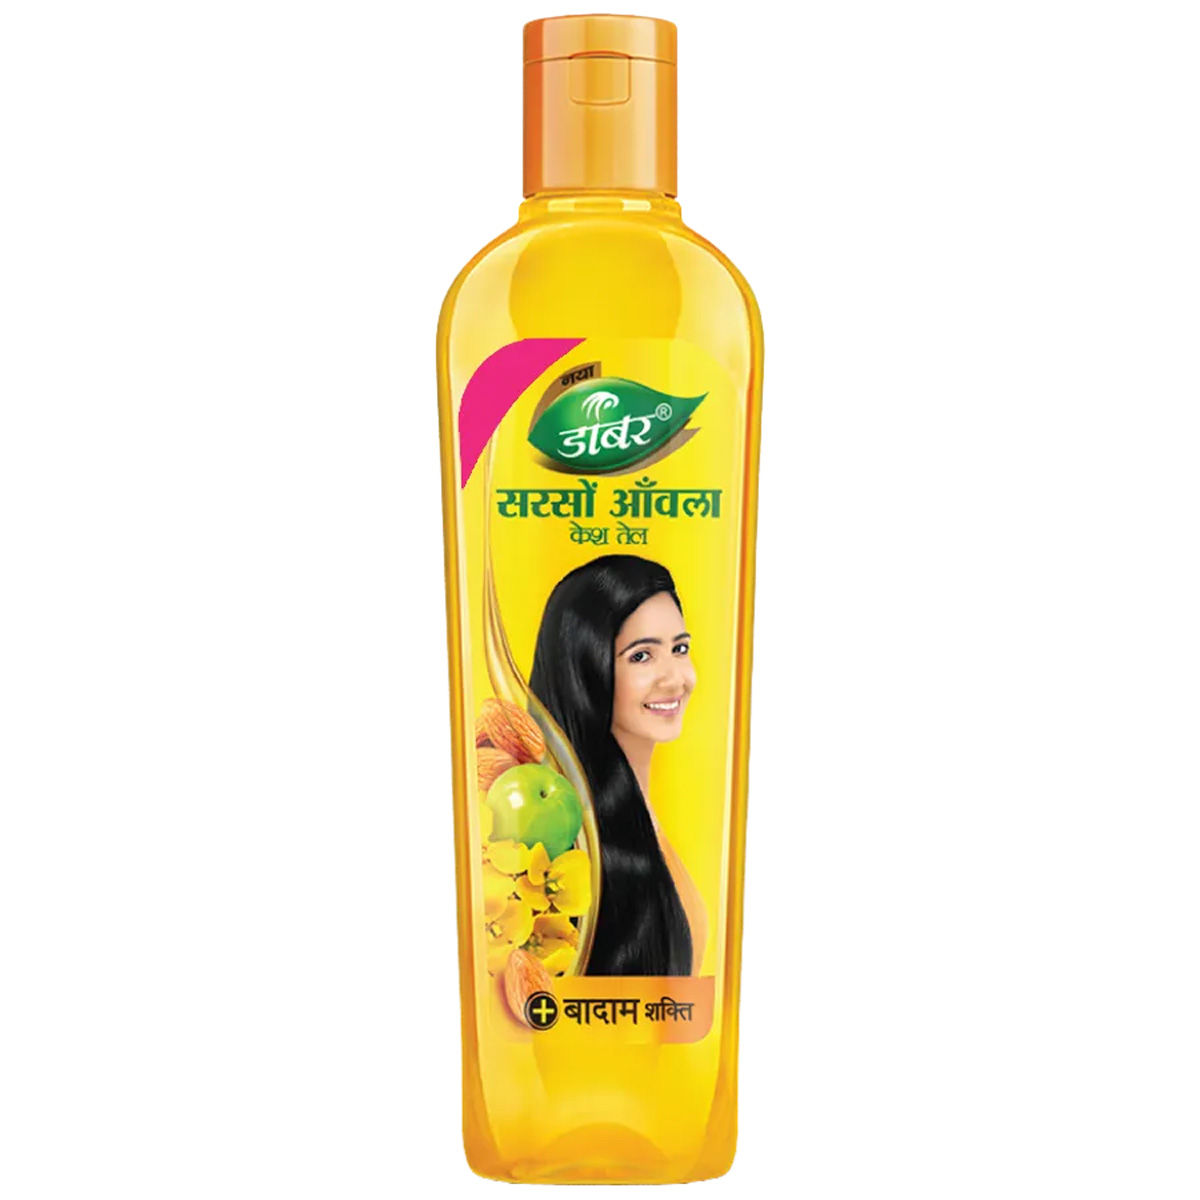 Buy Dabur Keratex Oil Ayurvedic Medicinal Oil  Reduces Hairfall by 565  100 ml Pack of 2 Online at Low Prices in India  Amazonin